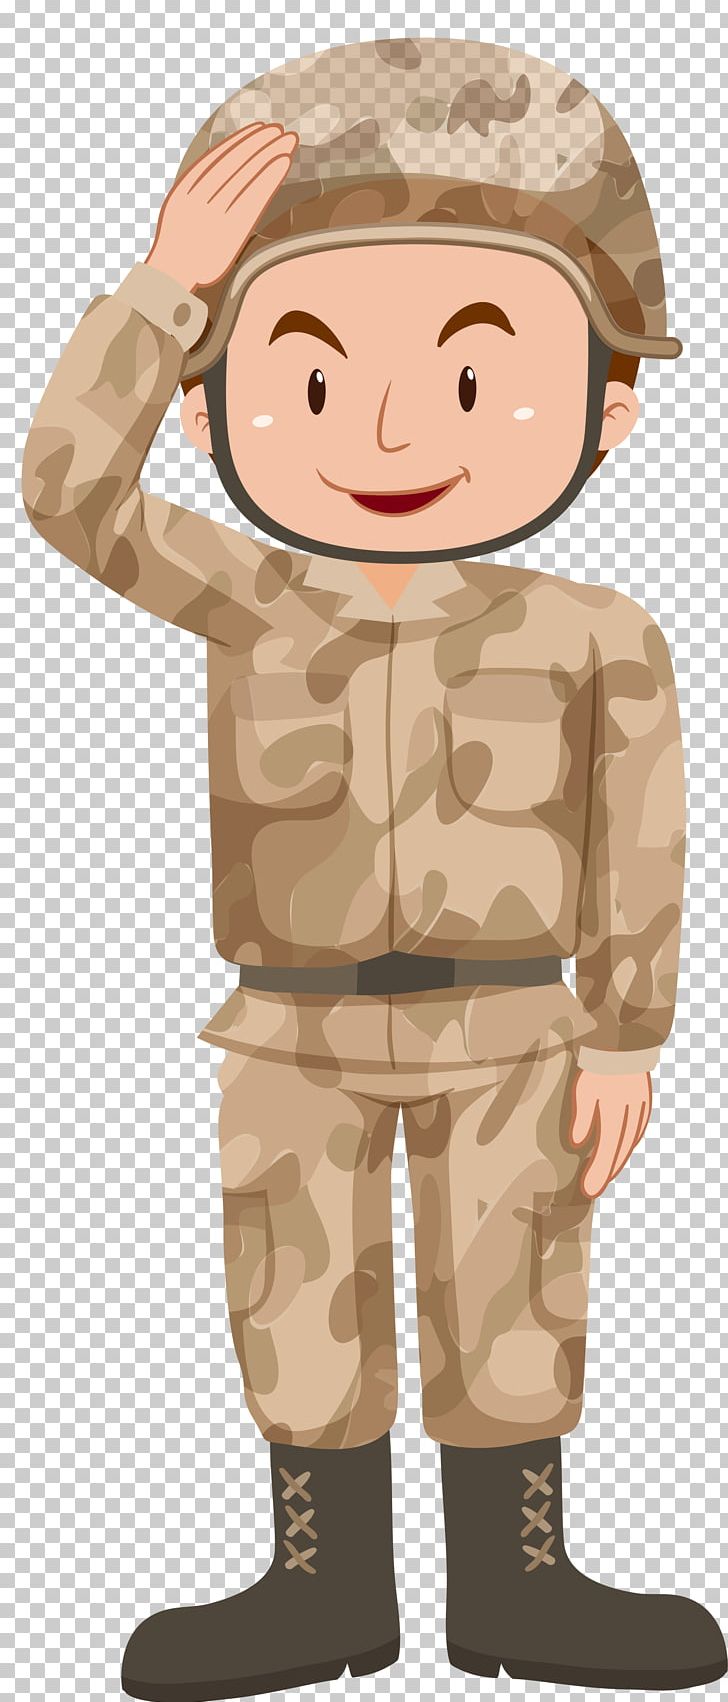 Soldier Illustration PNG, Clipart, Army, Boy, Cartoon, Cartoon Character, Cartoon Cloud Free PNG Download